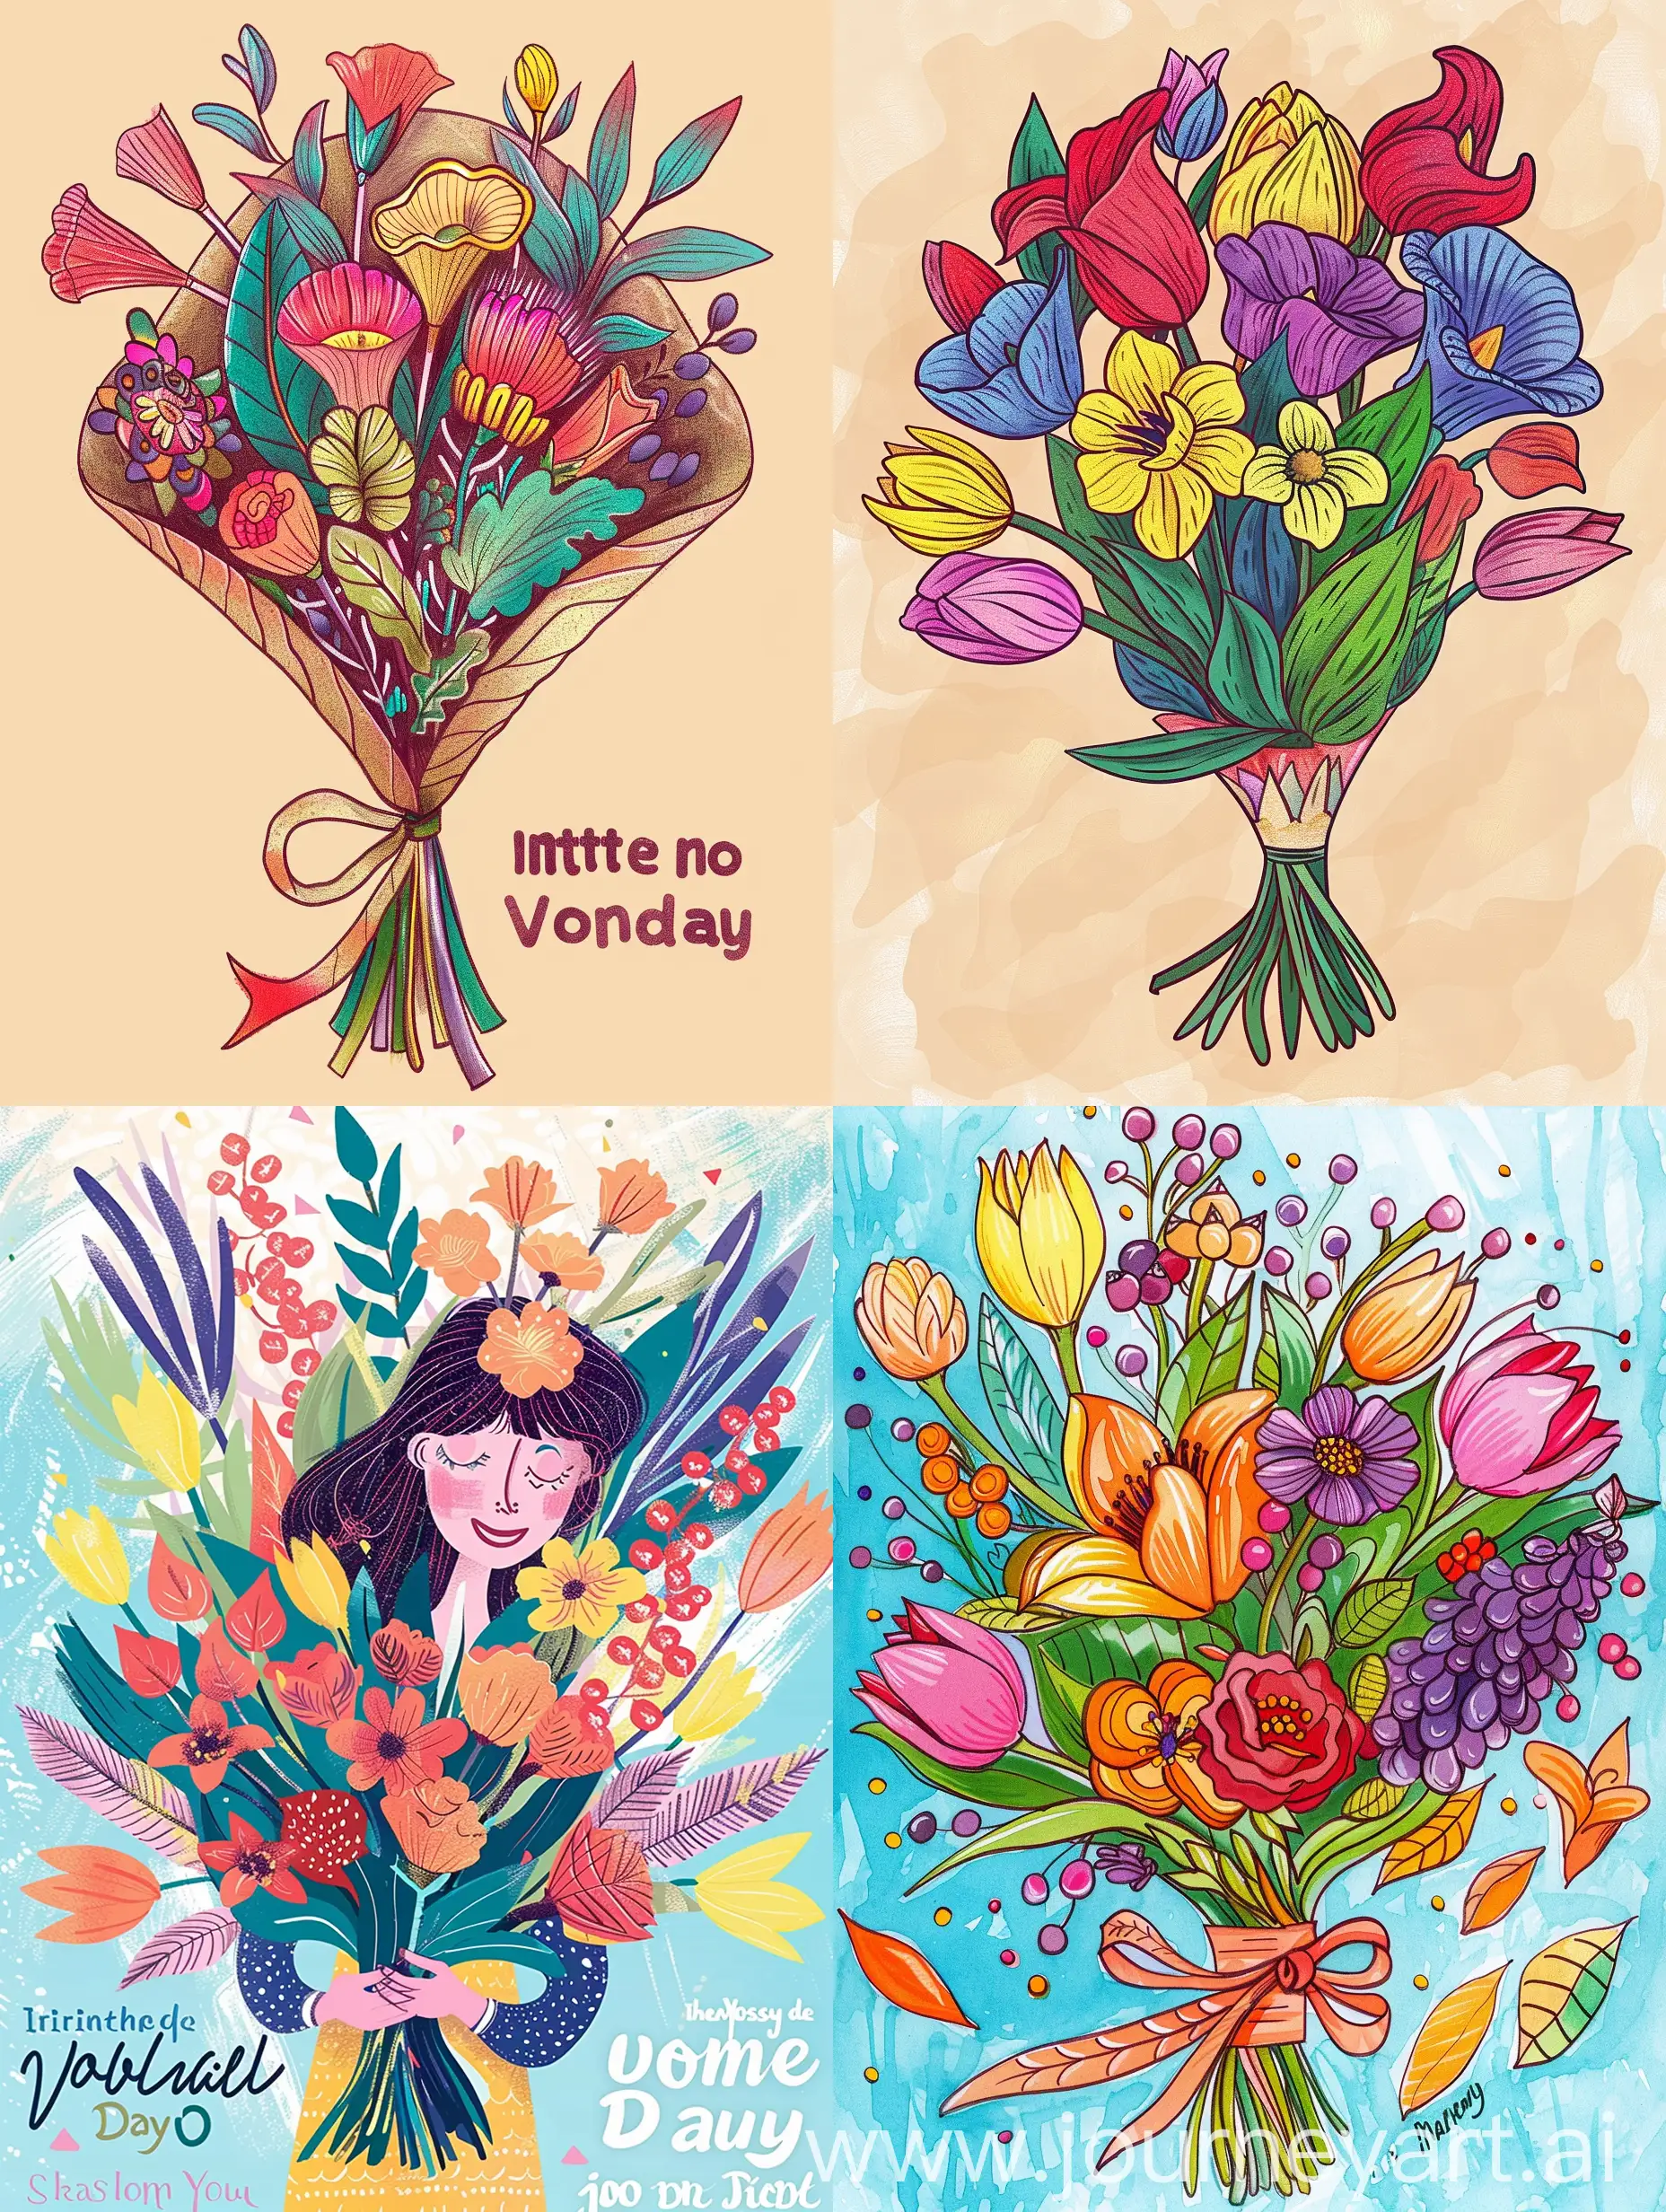 Celebrating-International-Womens-Day-with-a-Joyful-Bouquet-of-Colorful-Flowers